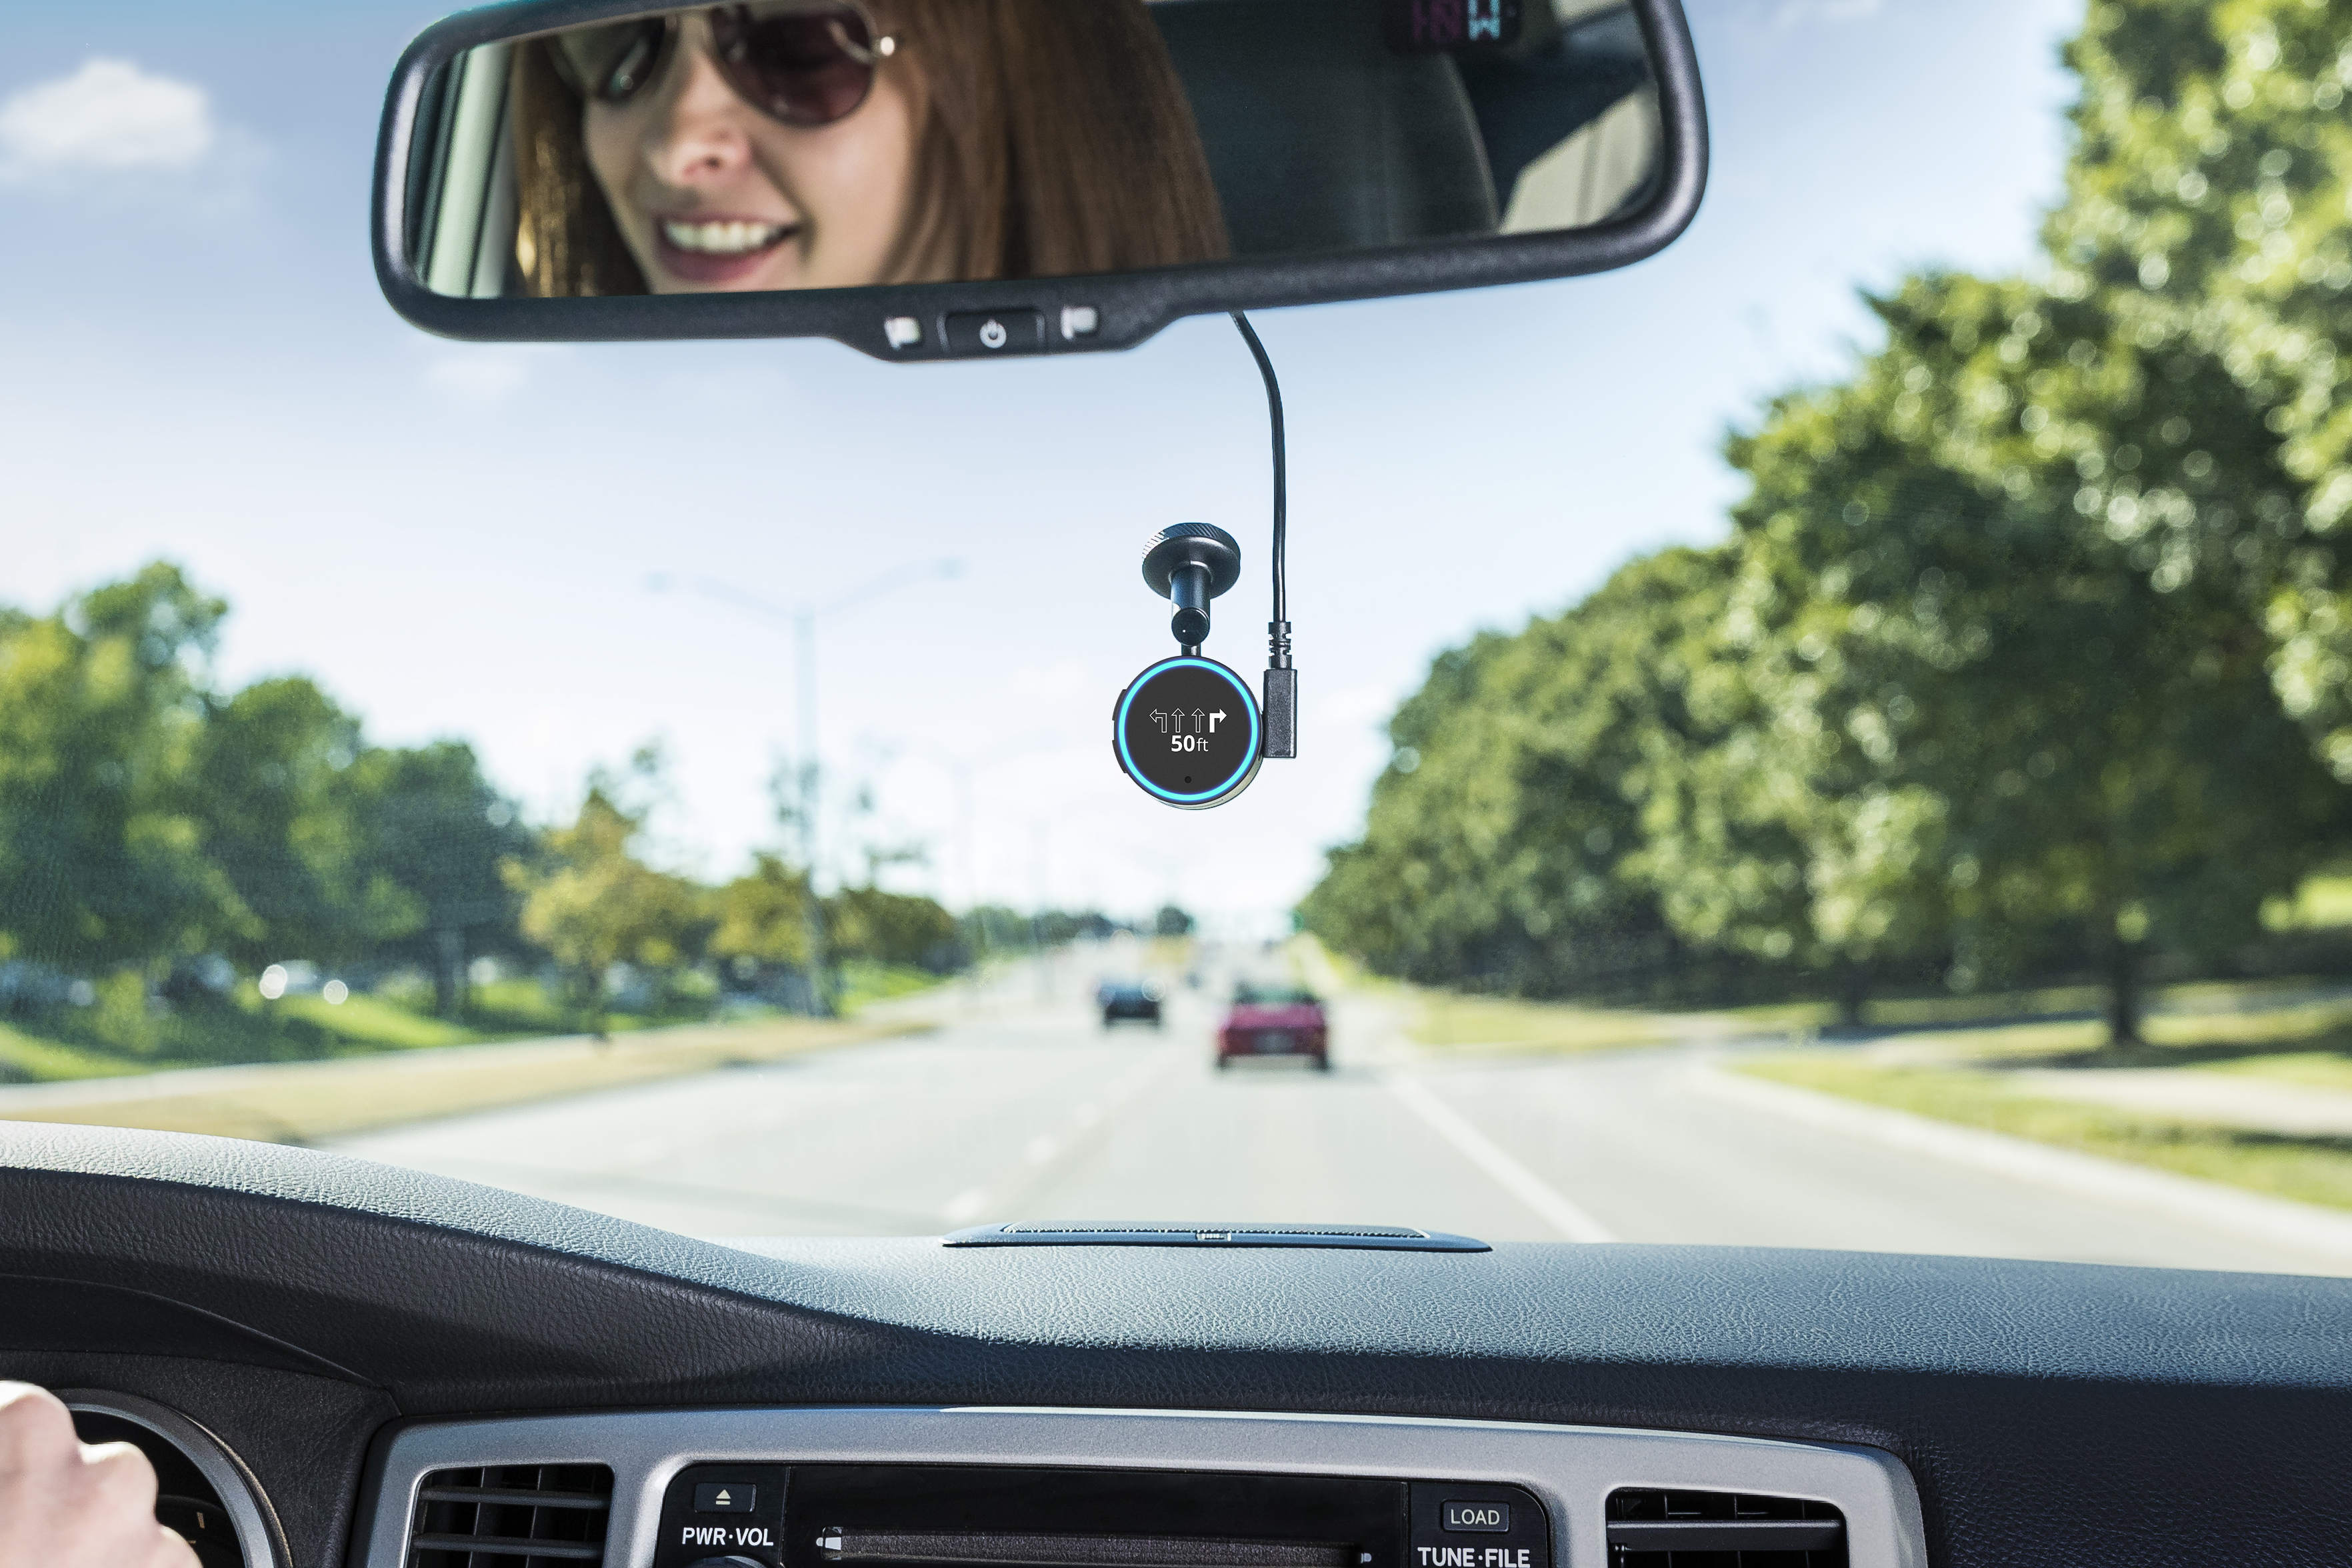 Introducing Garmin® Speak with Amazon Alexa – it's what you love about Amazon Alexa, now vehicle | Business Wire